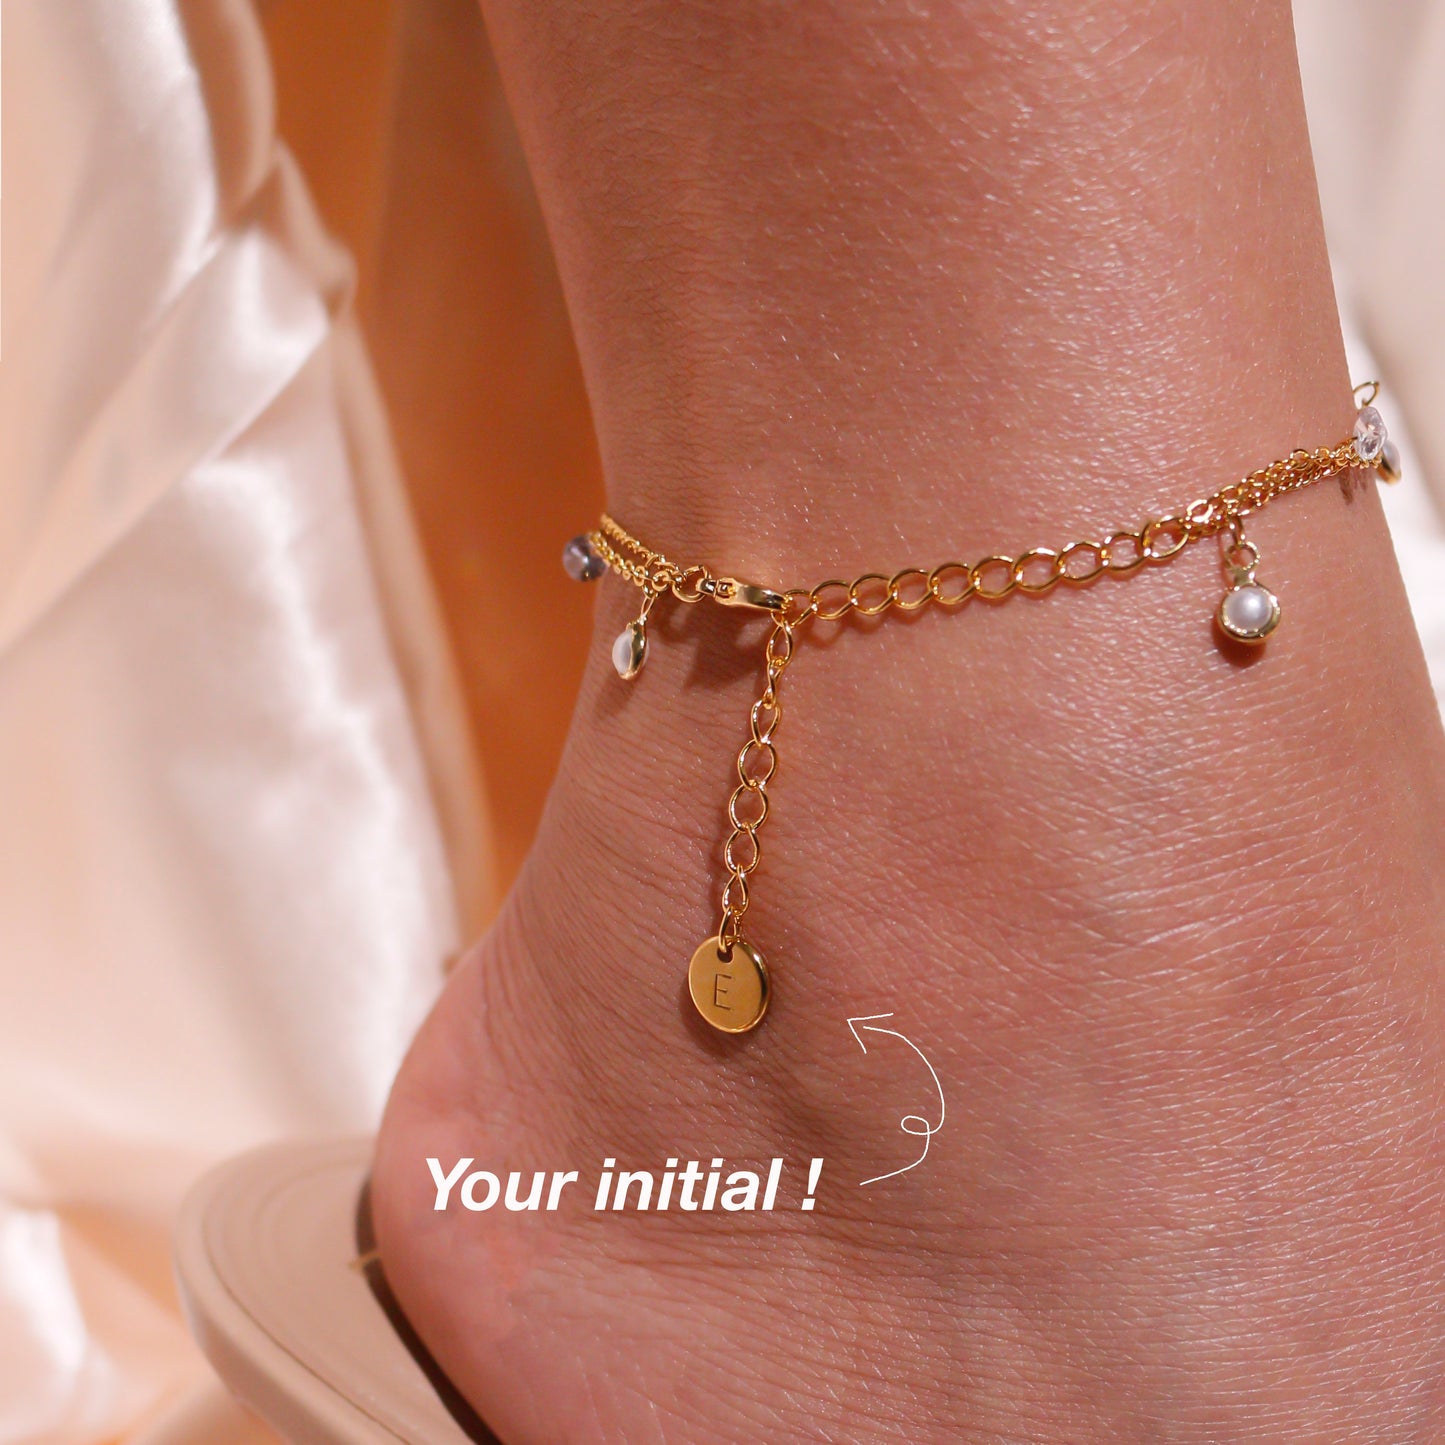 Pearl cubic anklet double layered anklets summer jewelry best gift for her anniversary